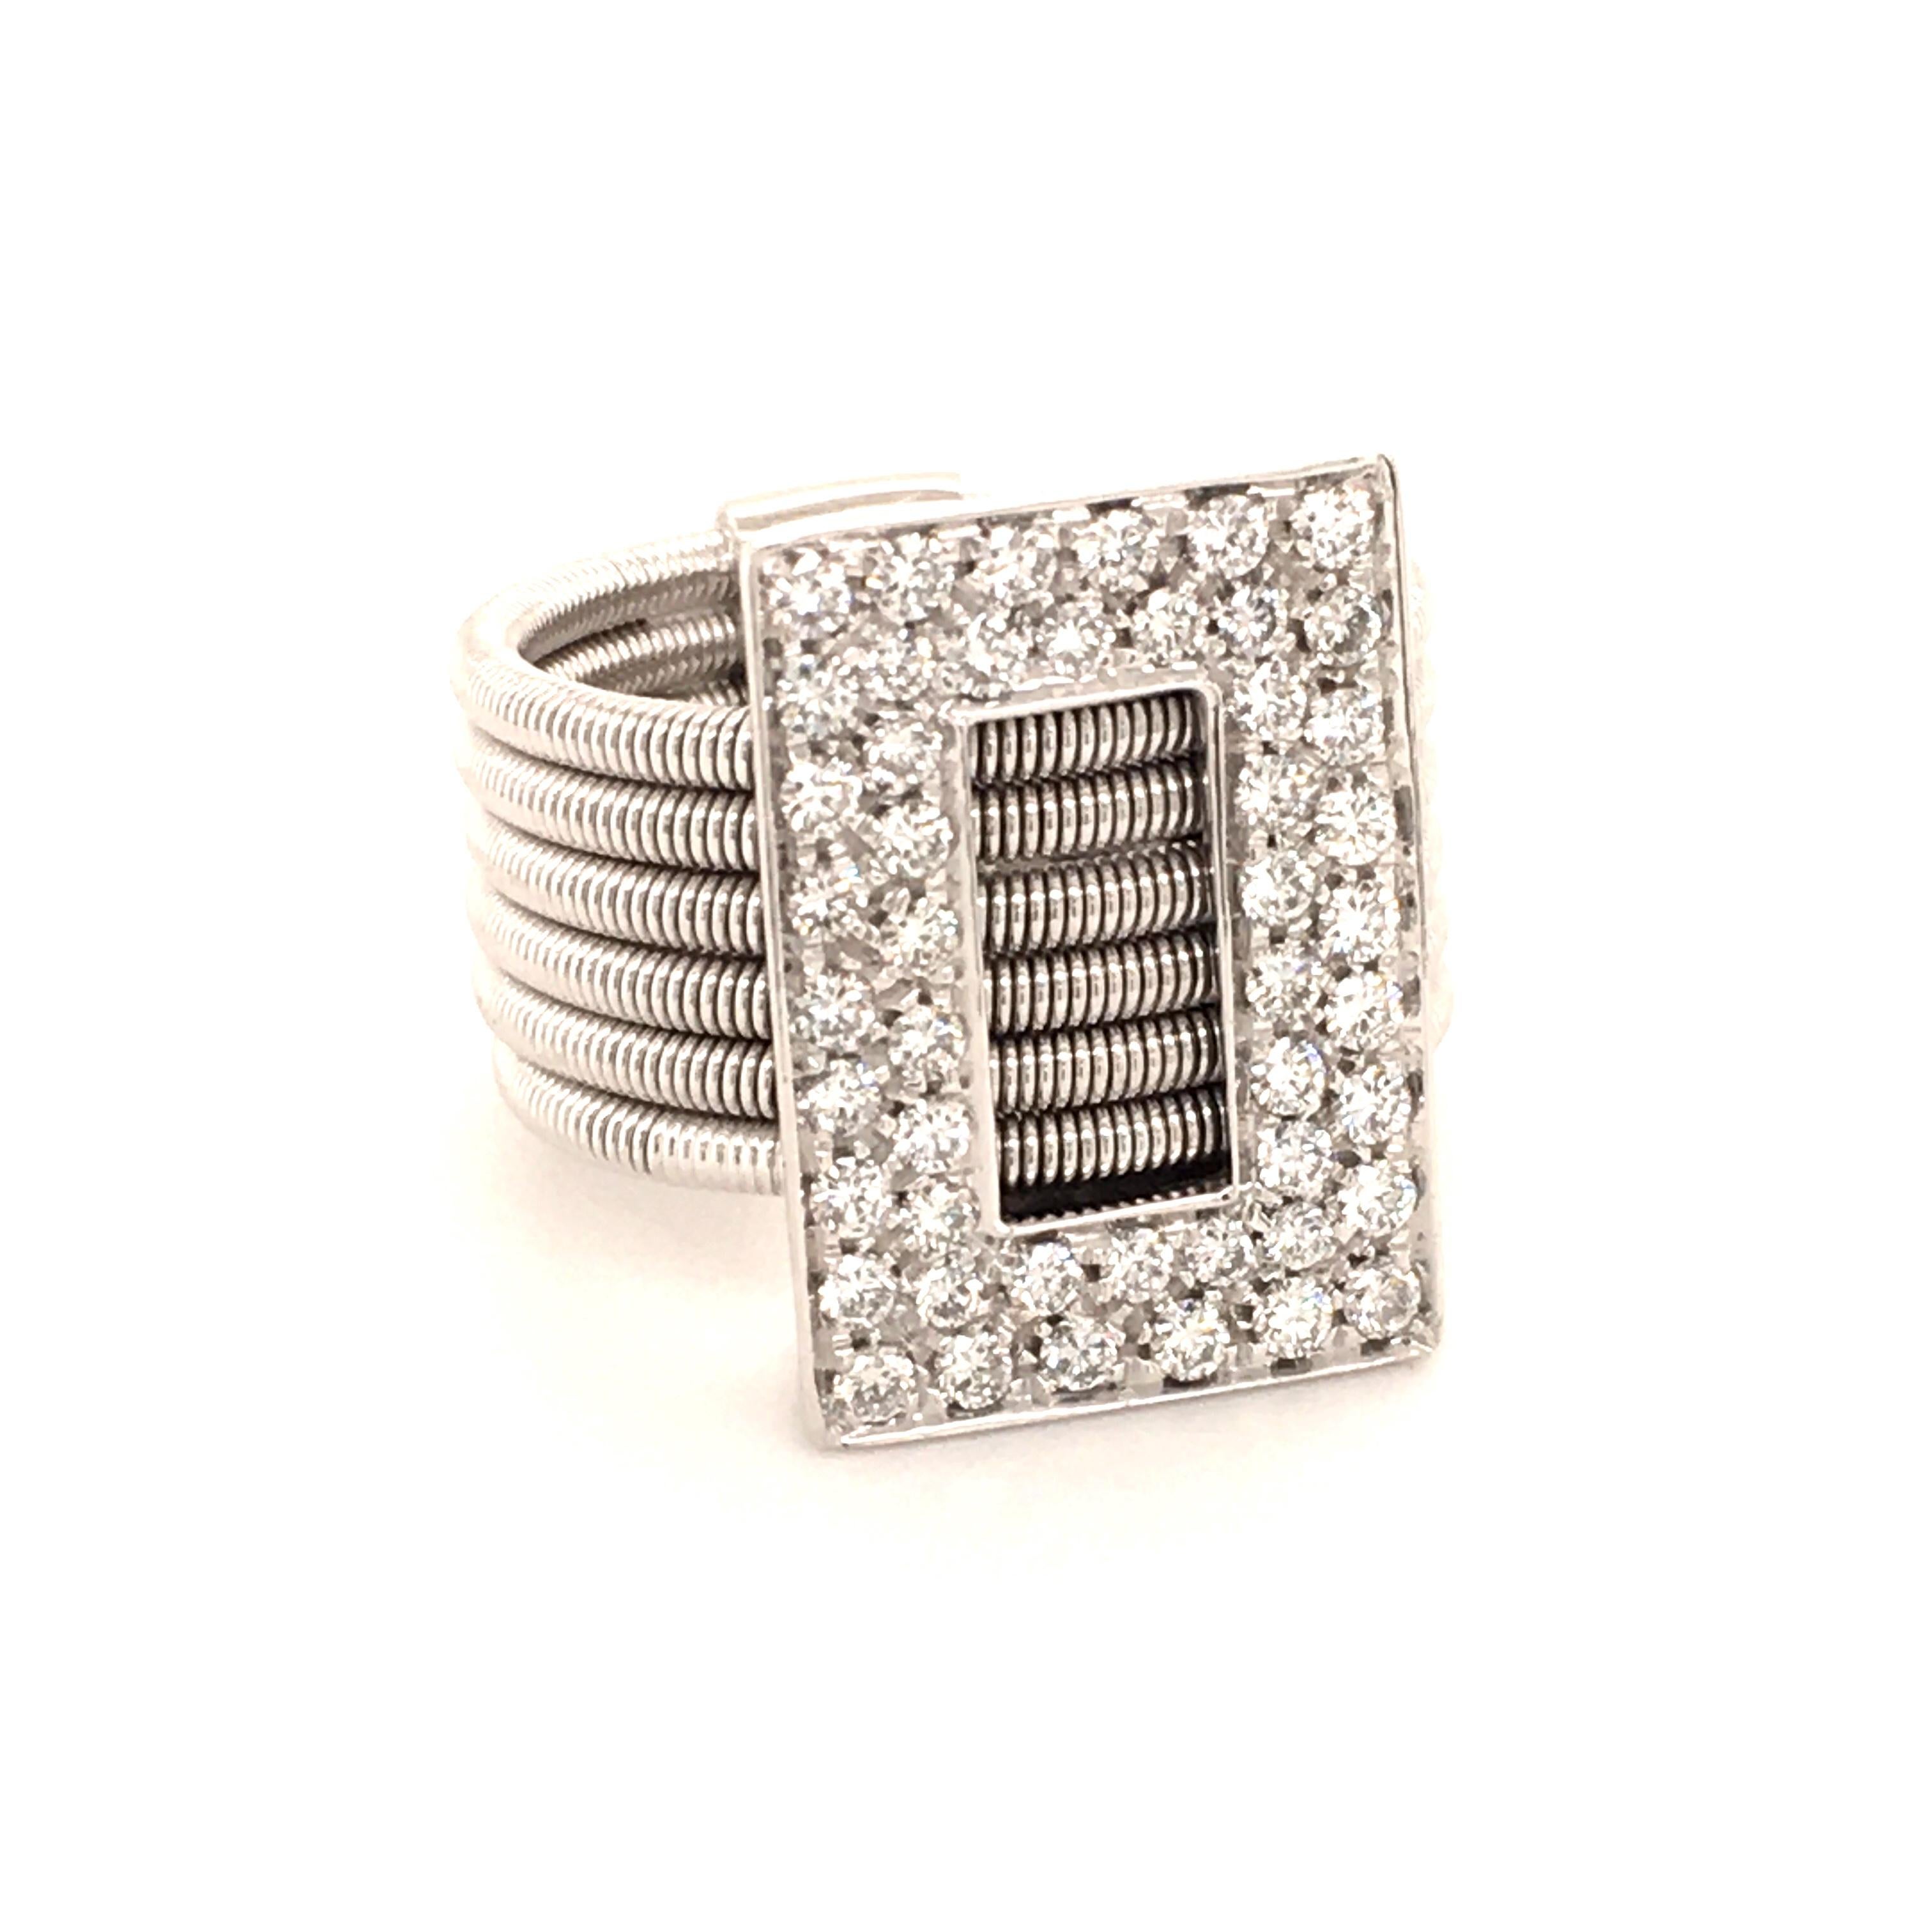 Modern diamond ring in 18 Karat white gold. The ring is designed as a rectangular frame pavé set with 48 brilliant-cut diamonds totalling 0.96 ct of weight. The ring band is consisting of six white gold wires which gives the ring an ultra-modern